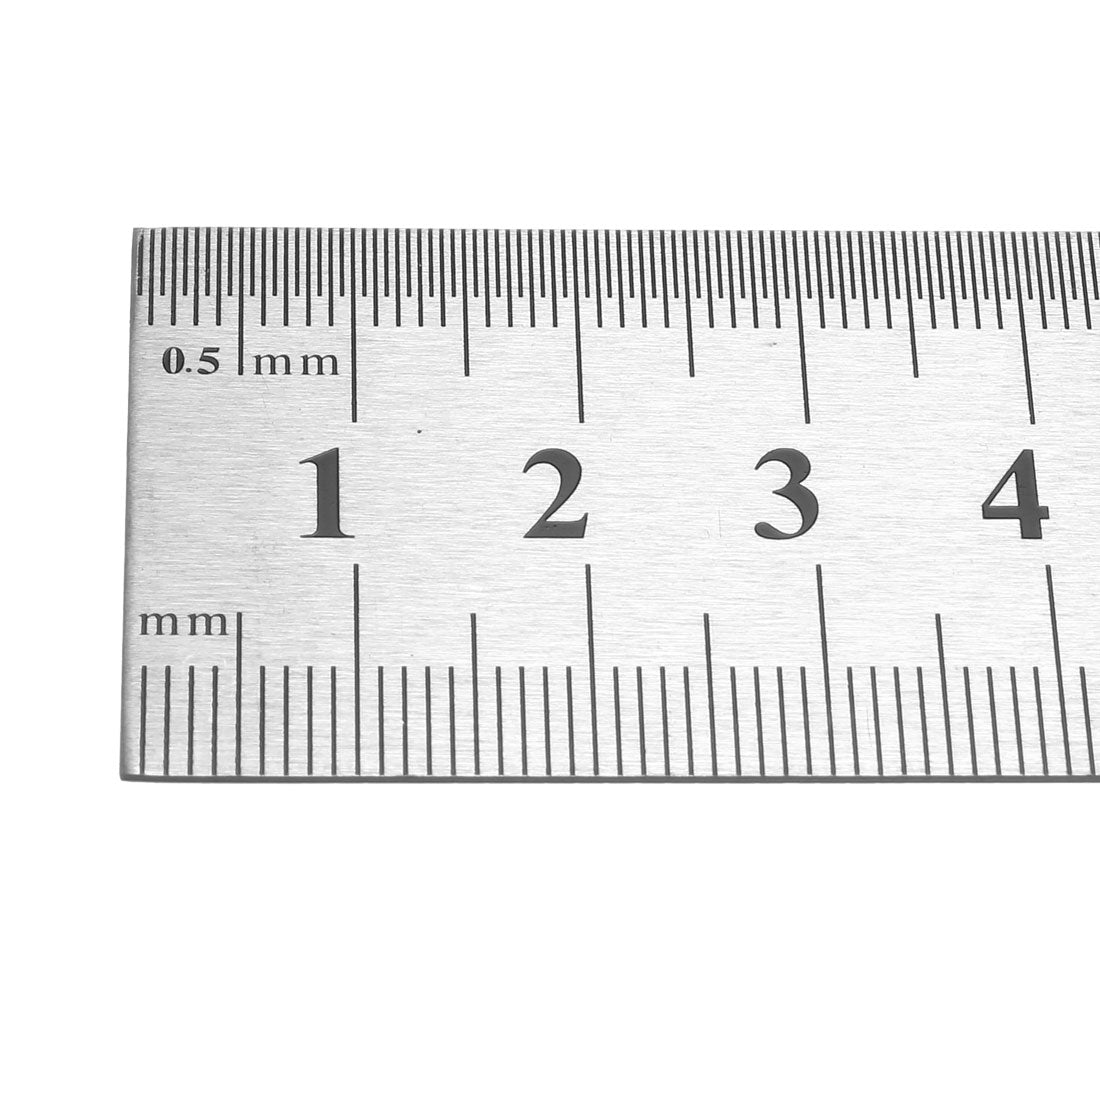 uxcell Uxcell Straight Ruler 400mm 16 Inch Metric Stainless Steel Measuring Ruler Tool with Hanging Hole